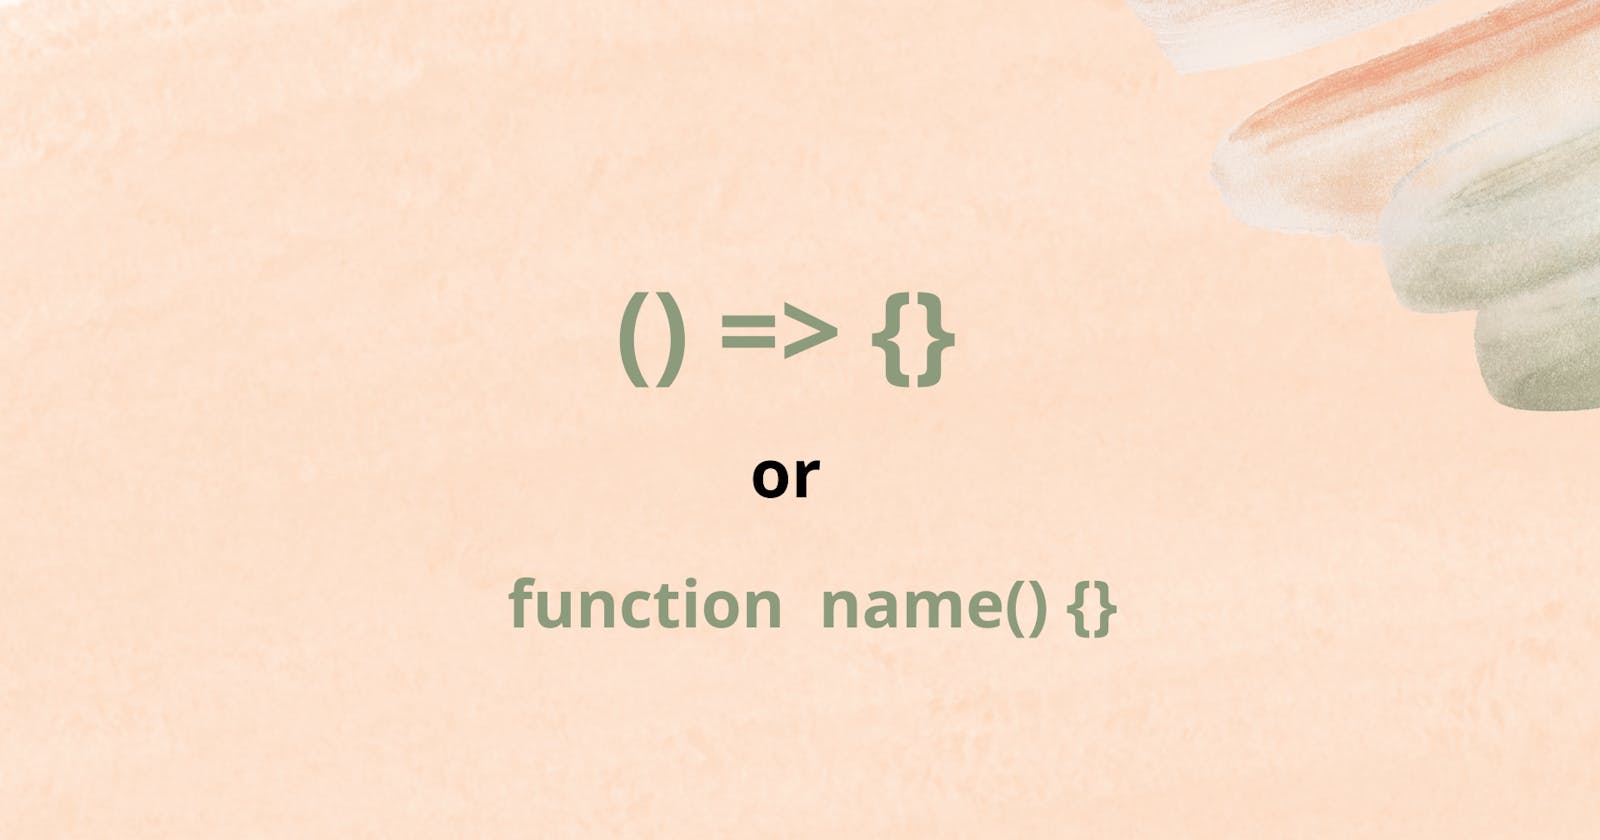 Why do we need an arrow function?